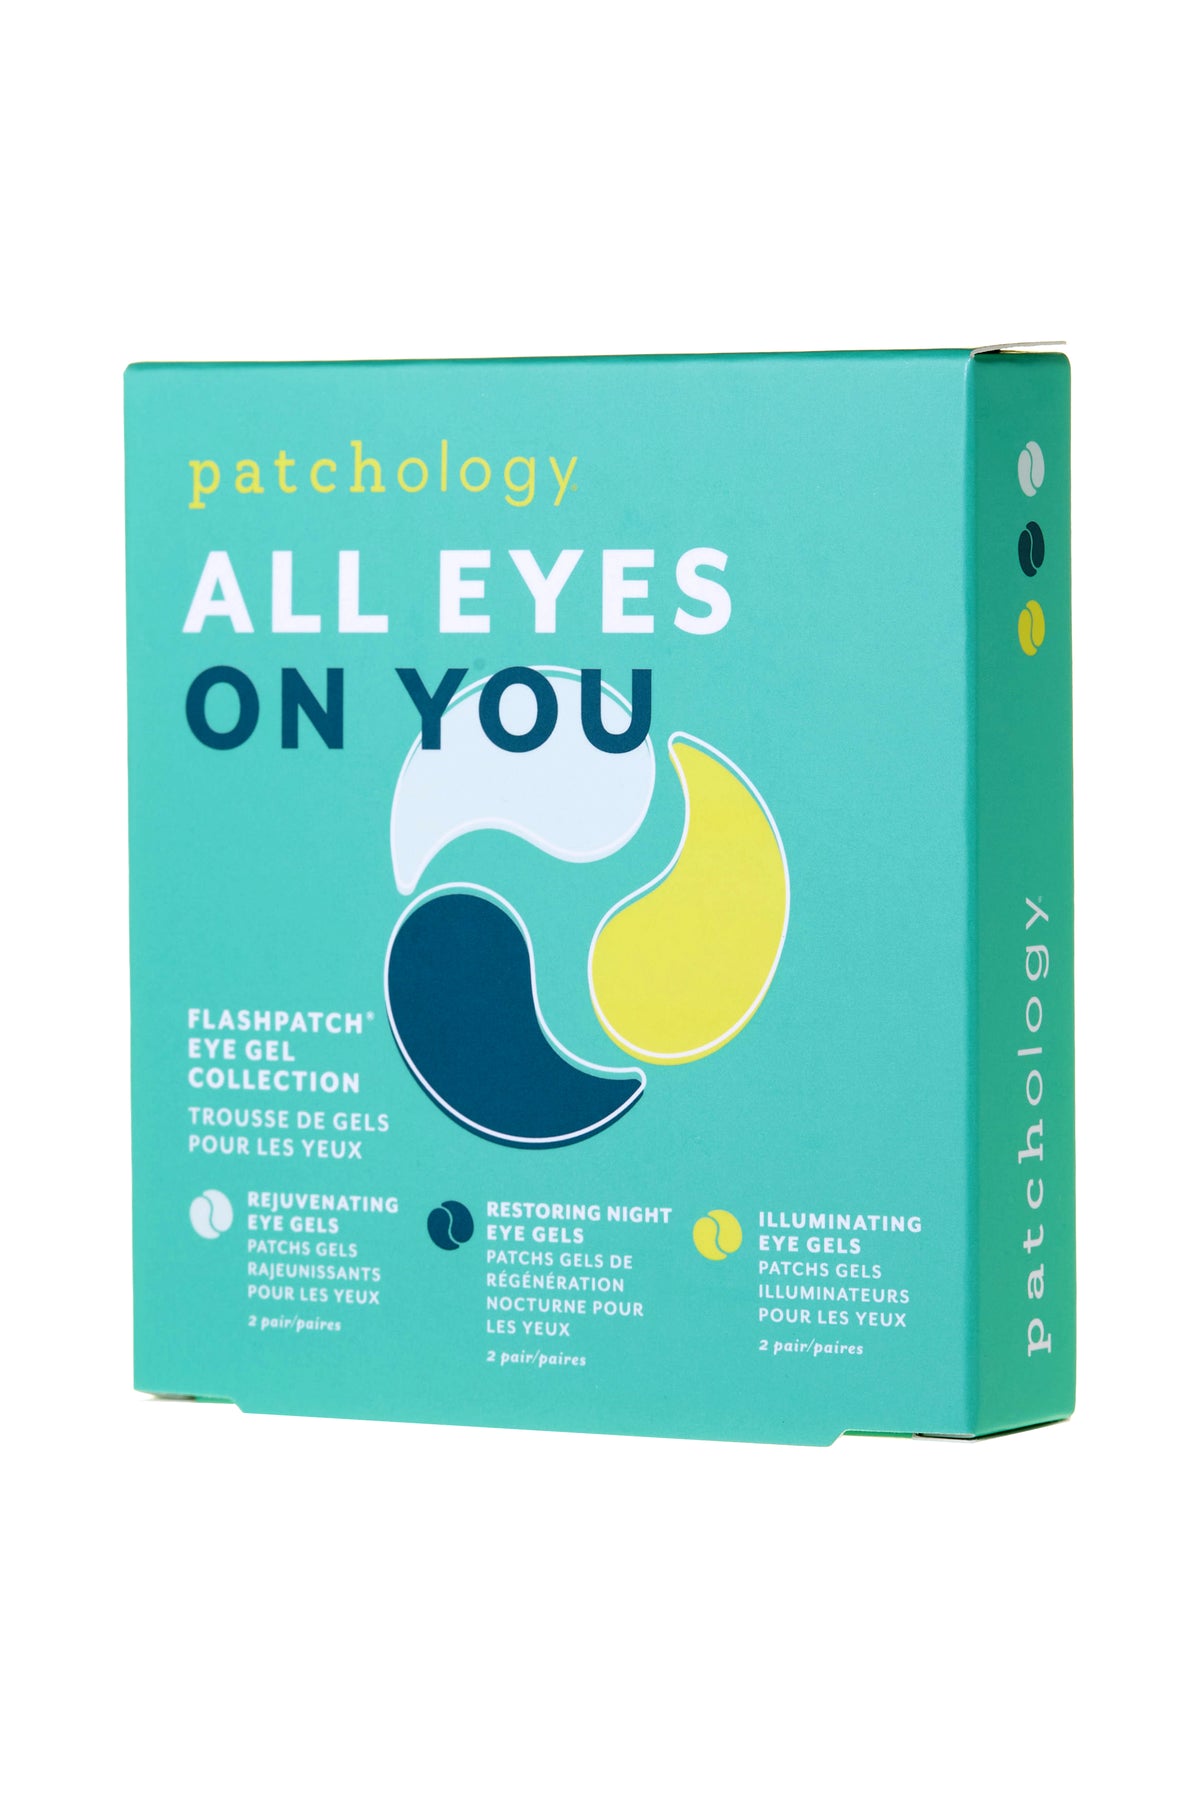 Patchology All Eyes on You Kit